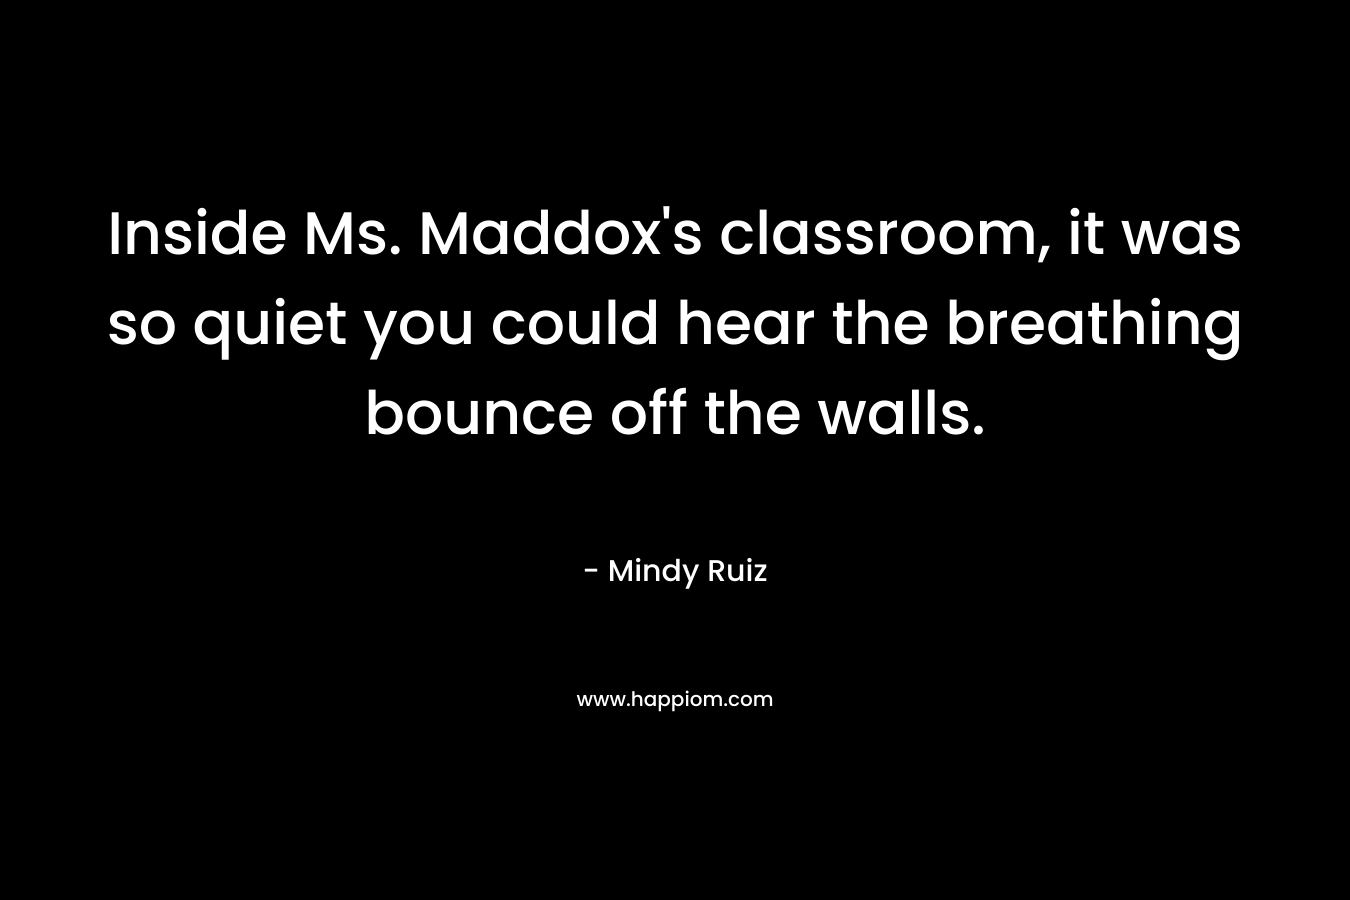 Inside Ms. Maddox’s classroom, it was so quiet you could hear the breathing bounce off the walls. – Mindy Ruiz